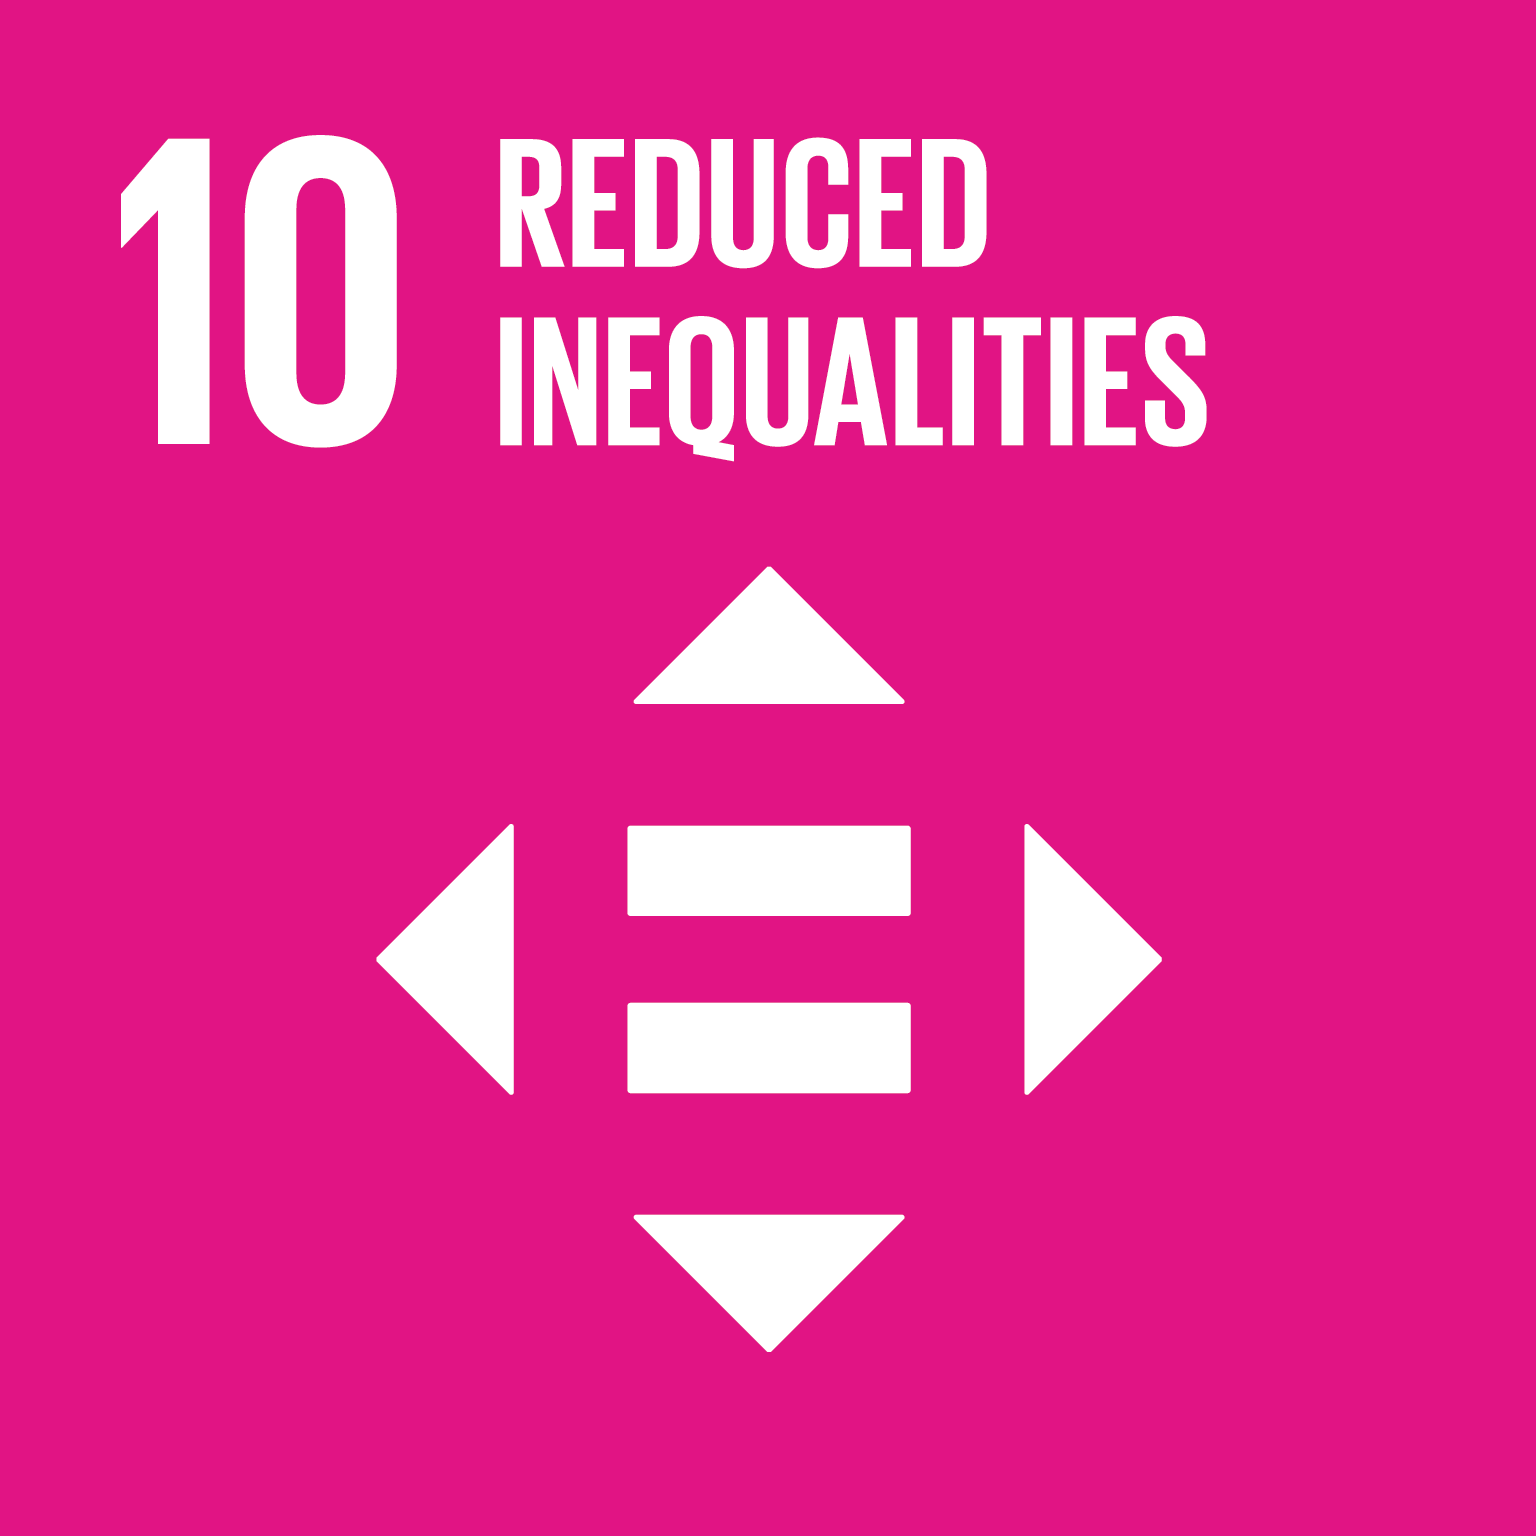 Goal 10: Reduced Inequalities, the text of this infographic is listed below